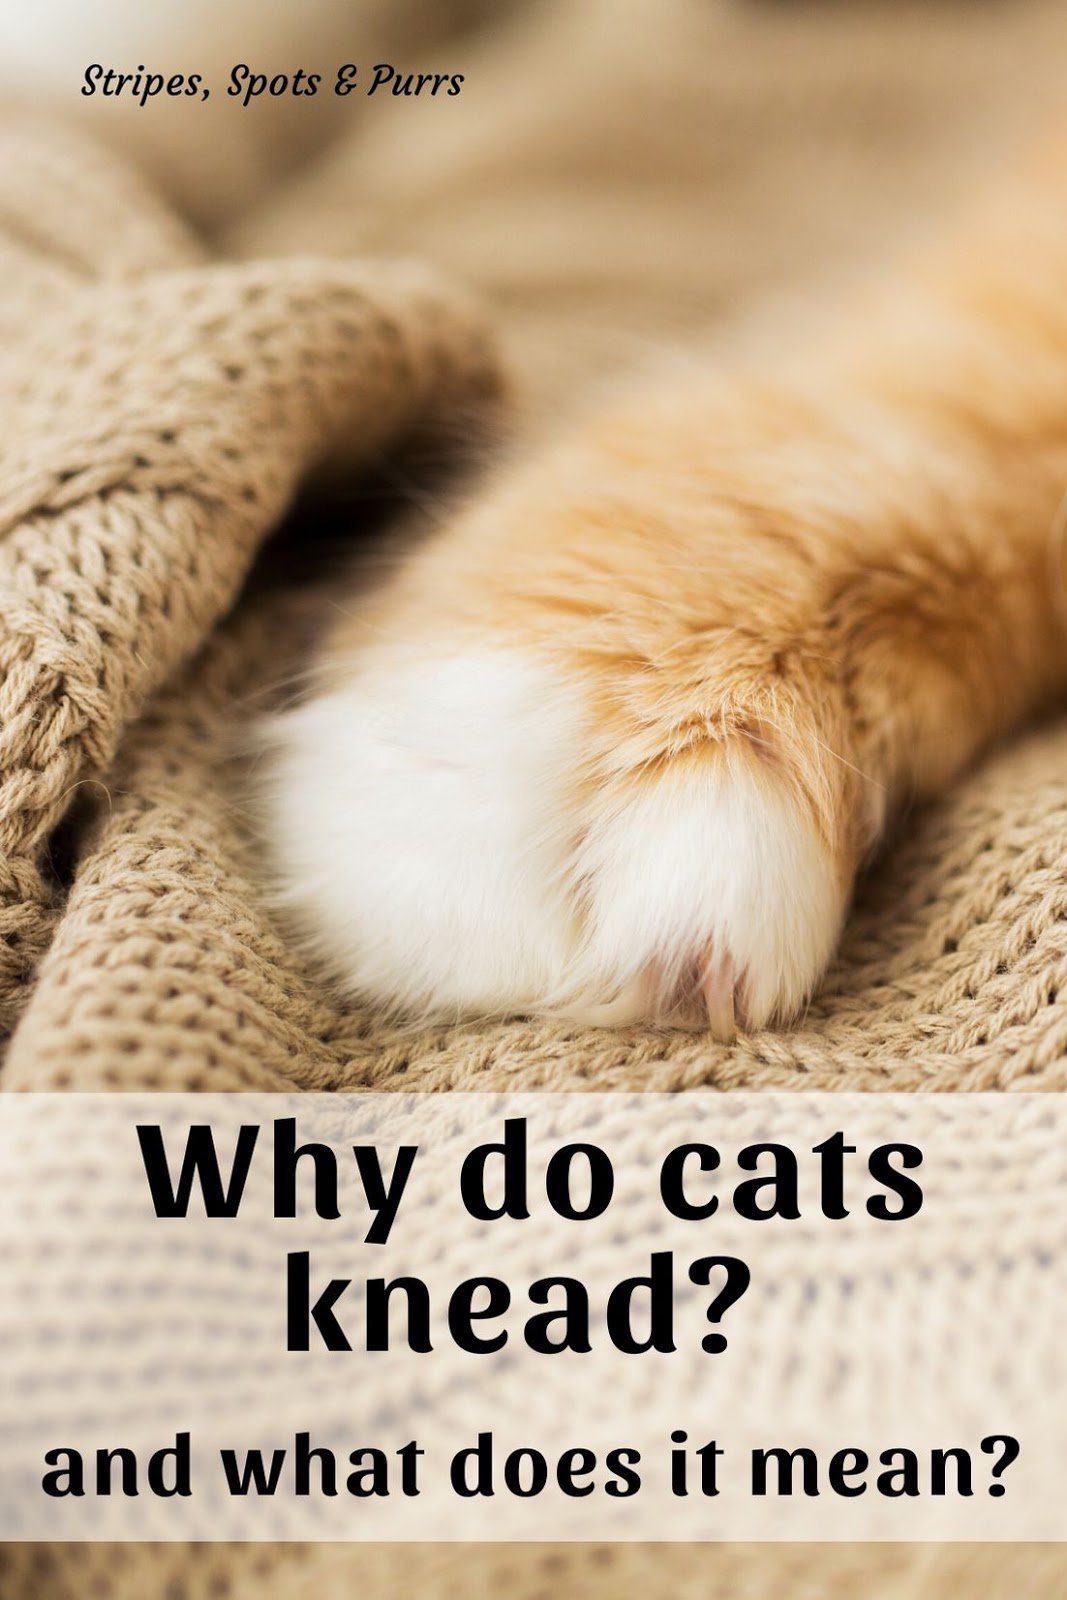 Stripes Spots and Purrs: Why Do Cats Knead?